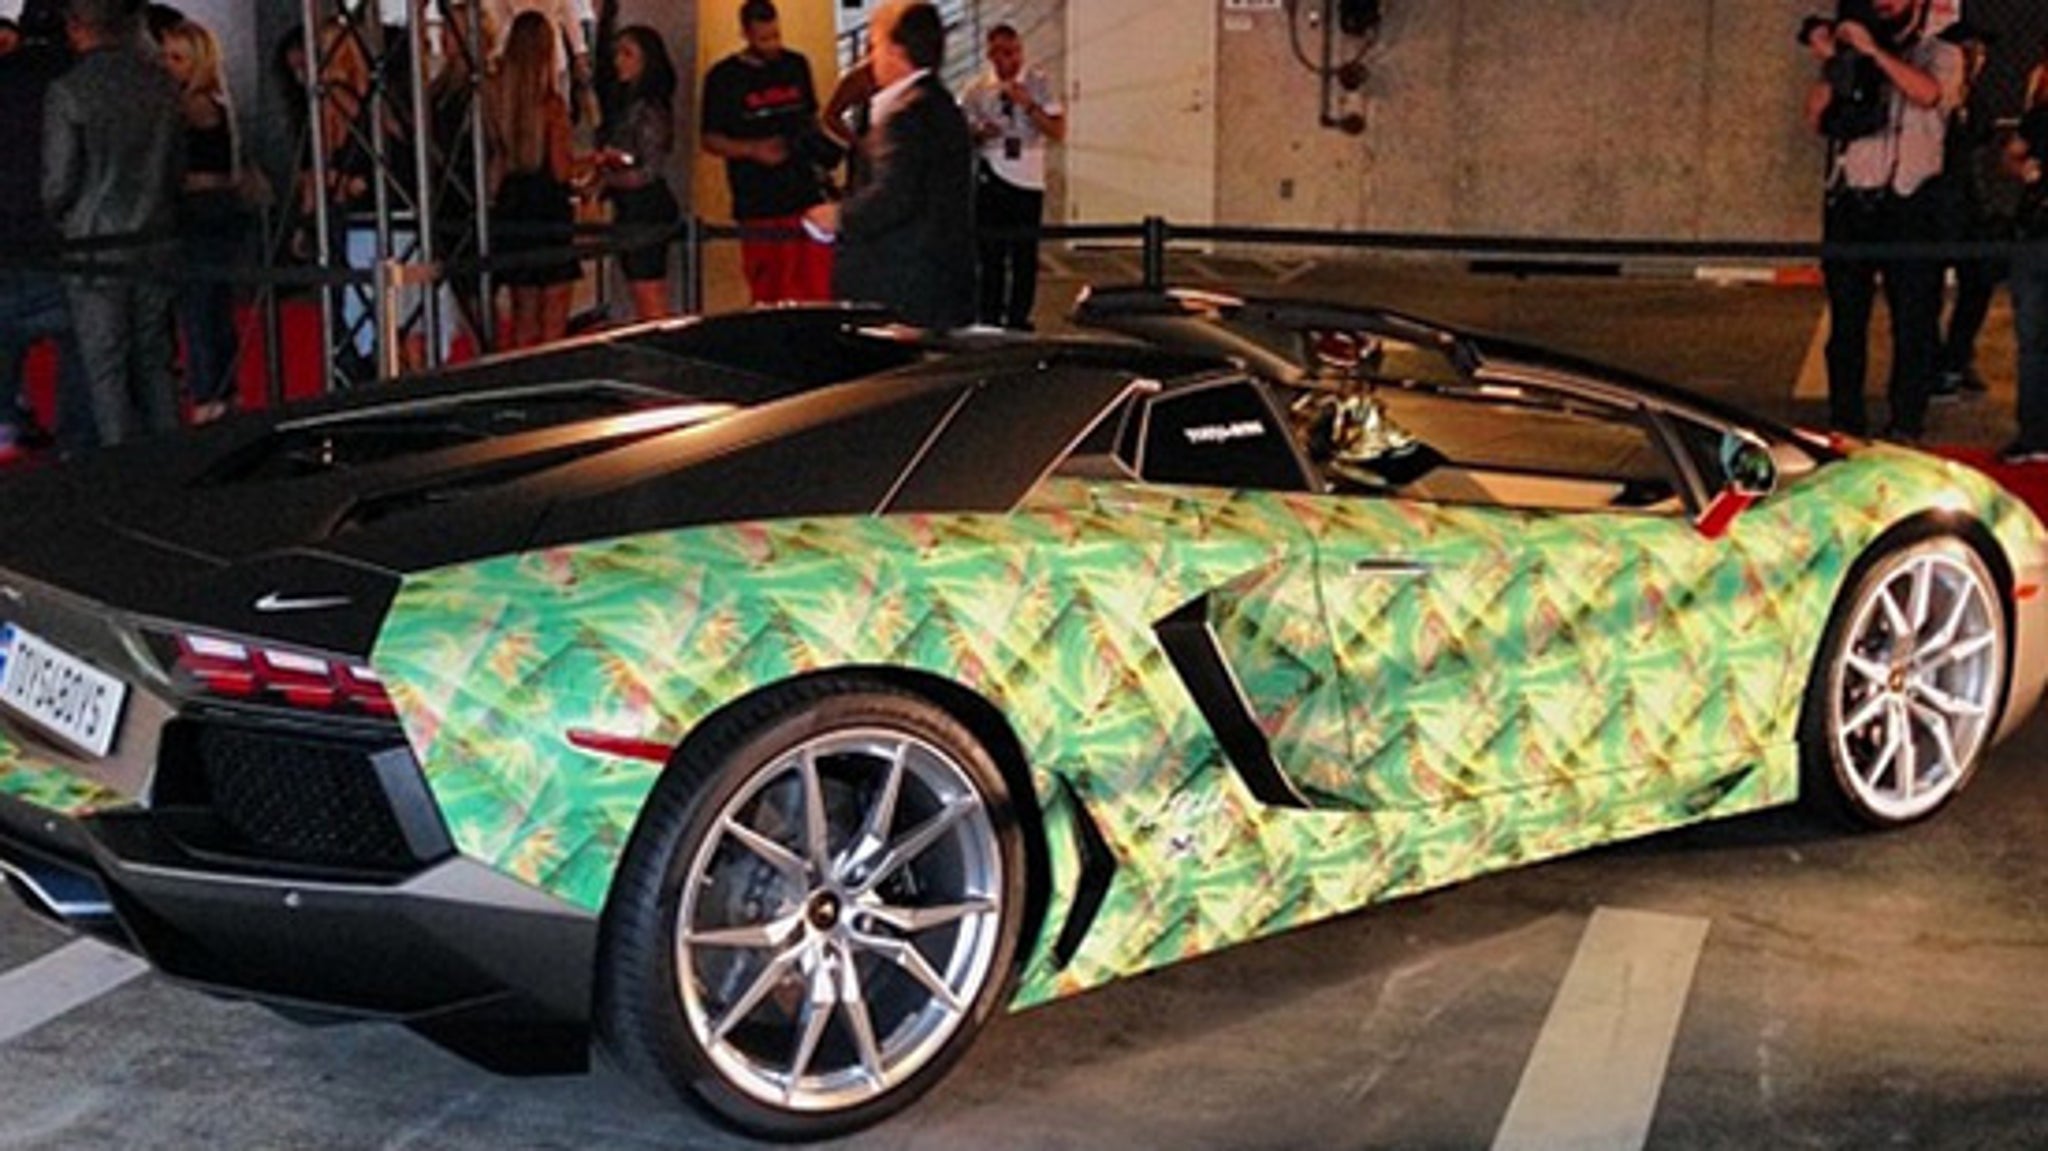 LeBron James -- Rent My Custom Lambo ... for $7,000 A DAY